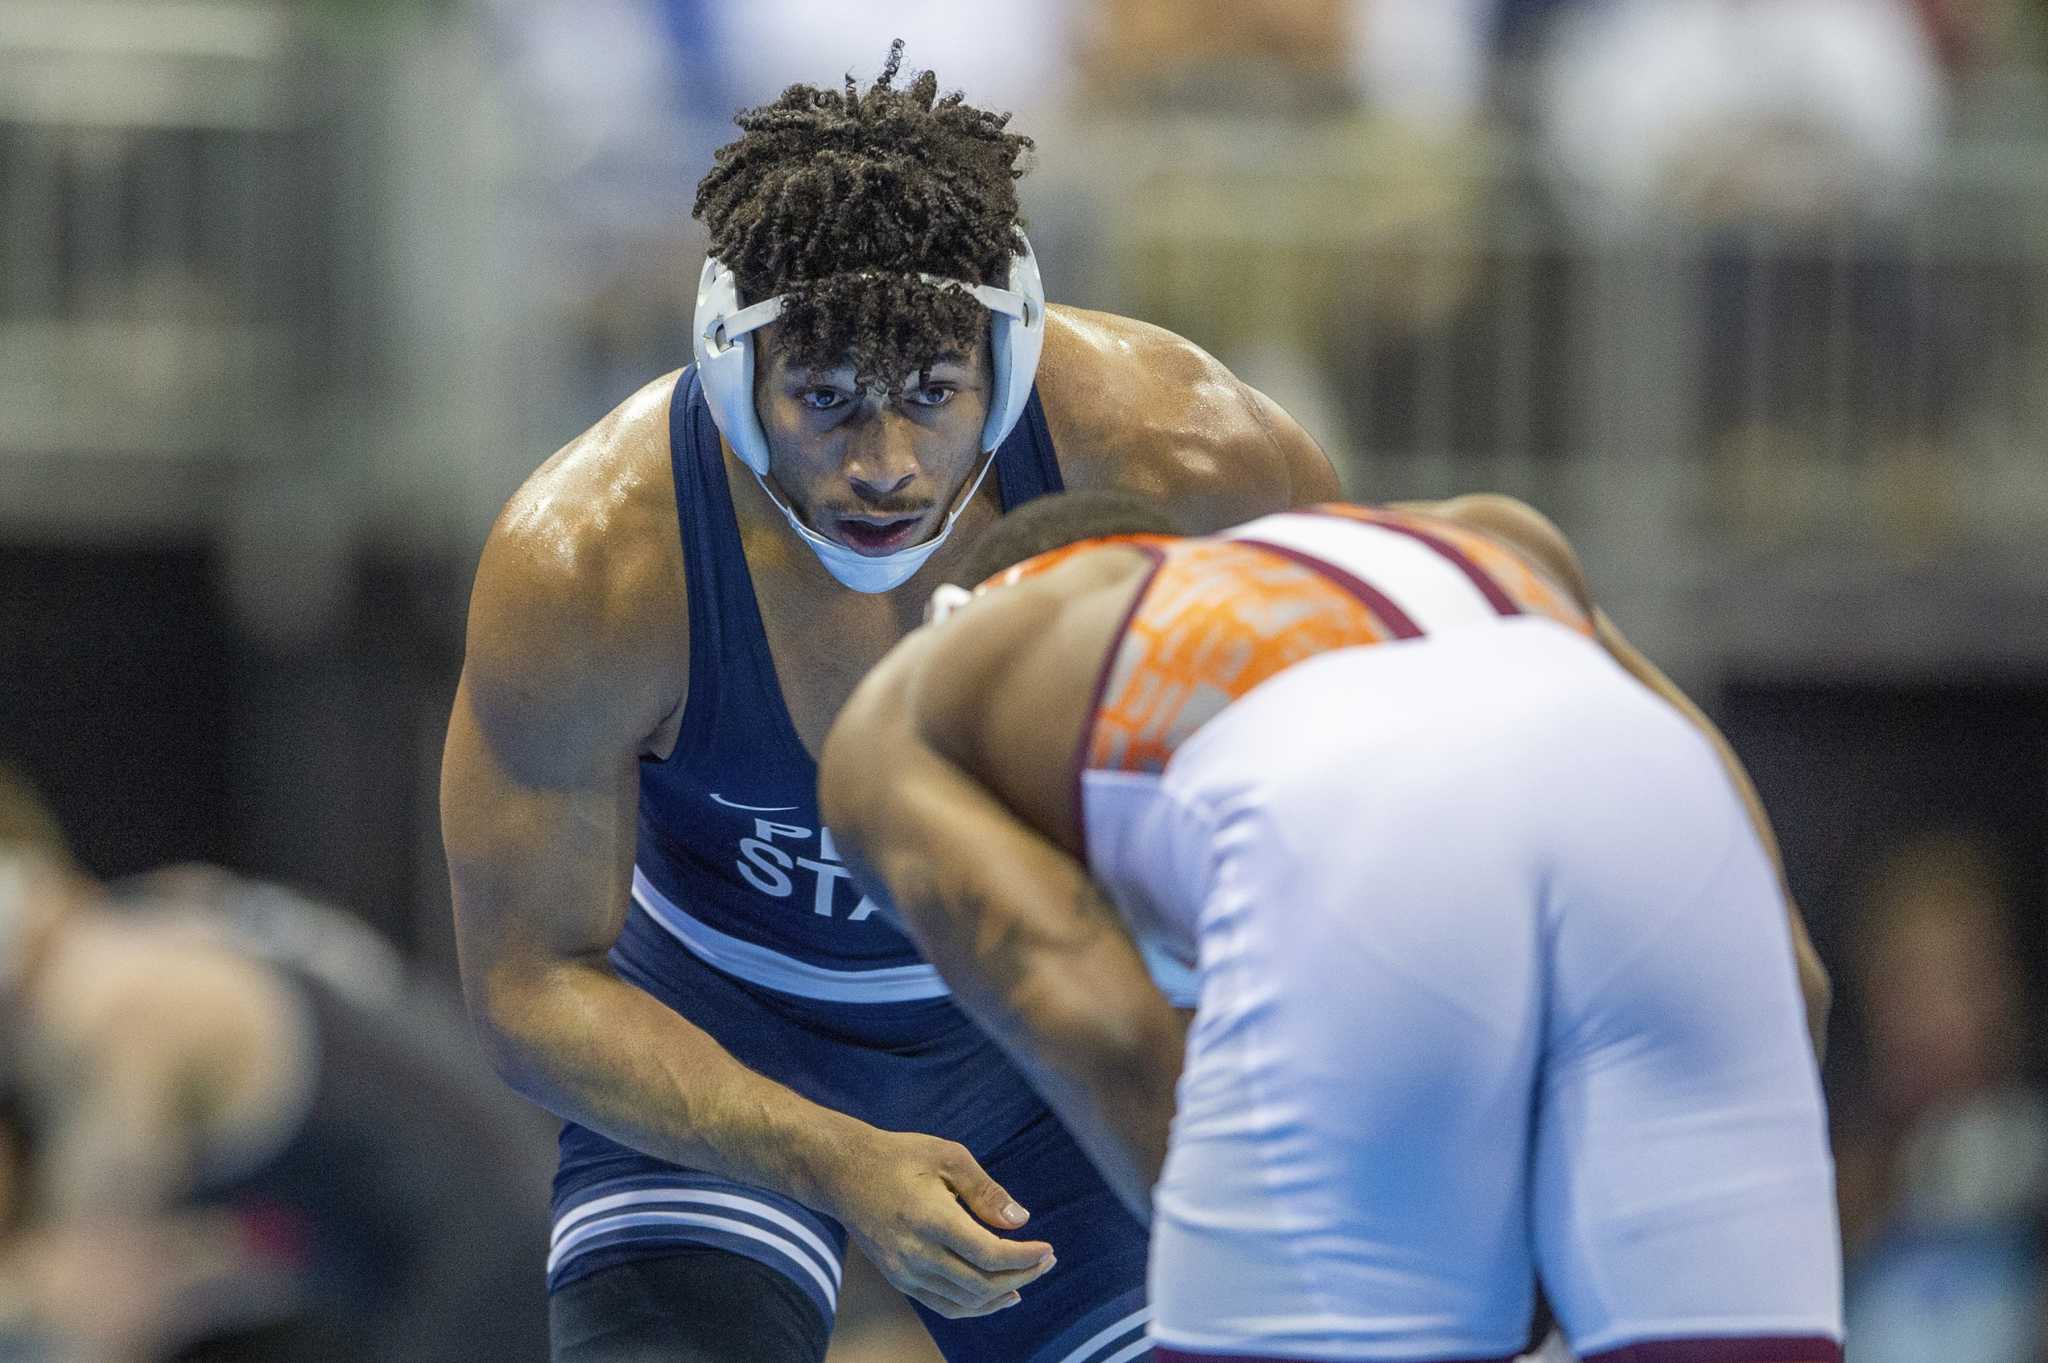 3time champ Starocci tops exchamp Lewis to reach semis at NCAA